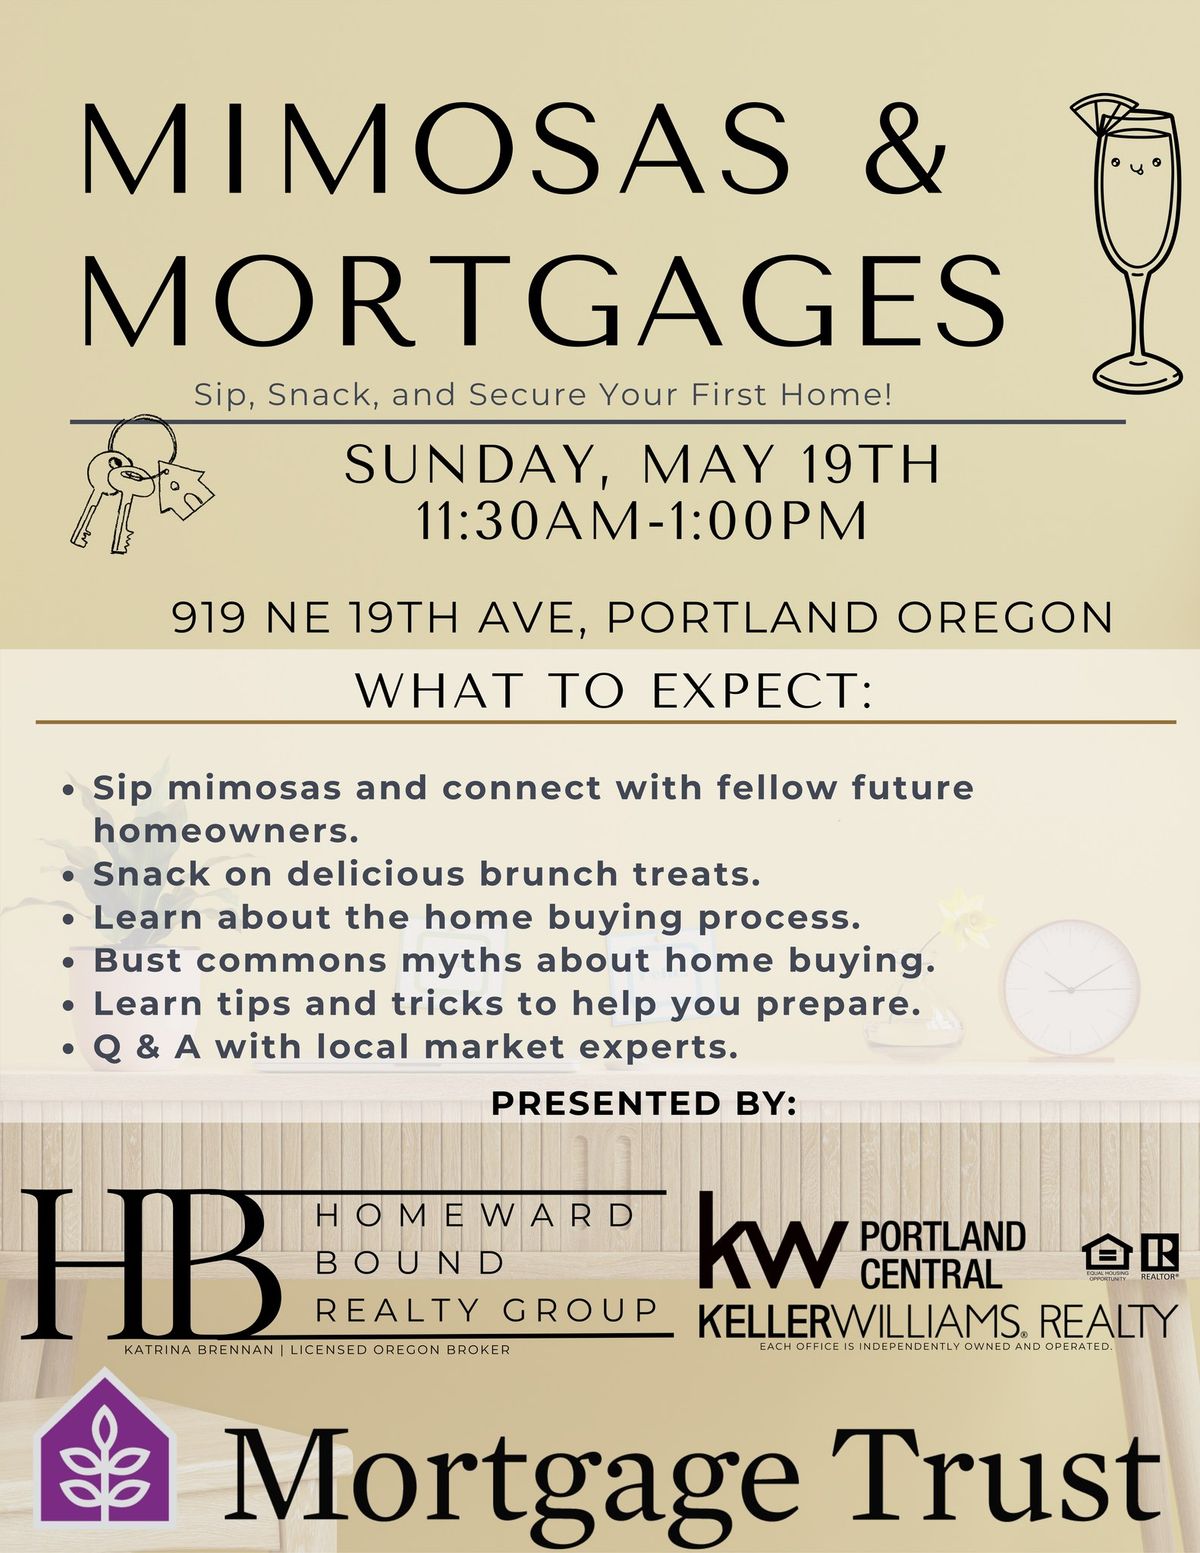 Mimosas & Mortgages: Sip, Snack & Secure Your First Home. 